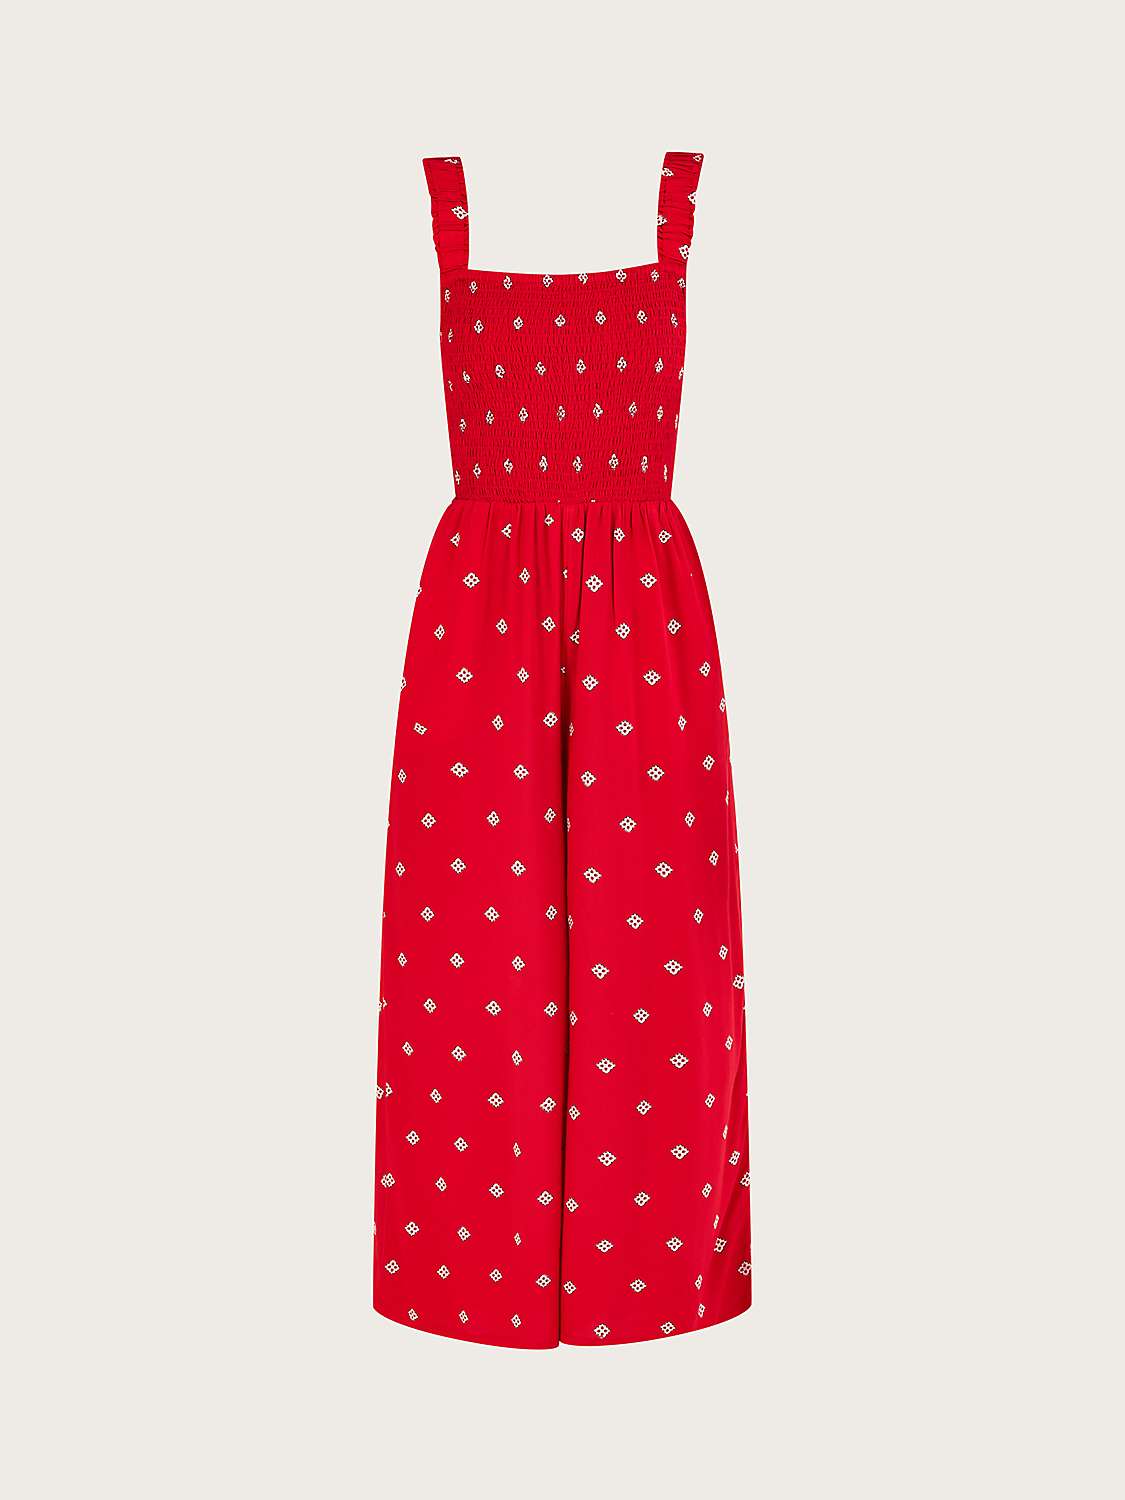 Buy Monsoon Geometric Print Cut-Out Back Jumpsuit, Red Online at johnlewis.com